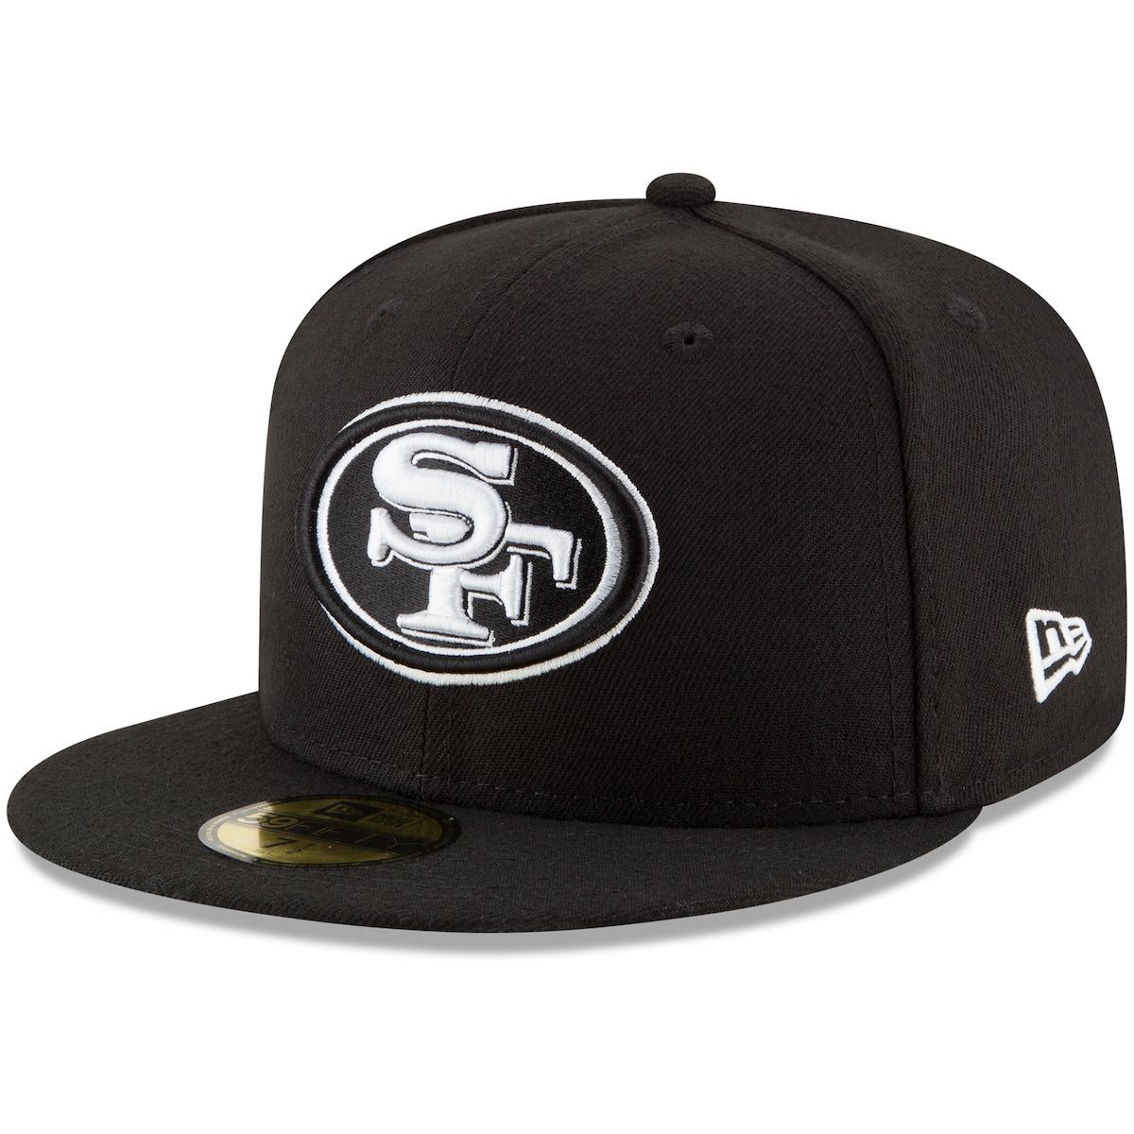 New Era Men's Black San Francisco 49ers B-Dub 59FIFTY Fitted Hat - Image 2 of 2